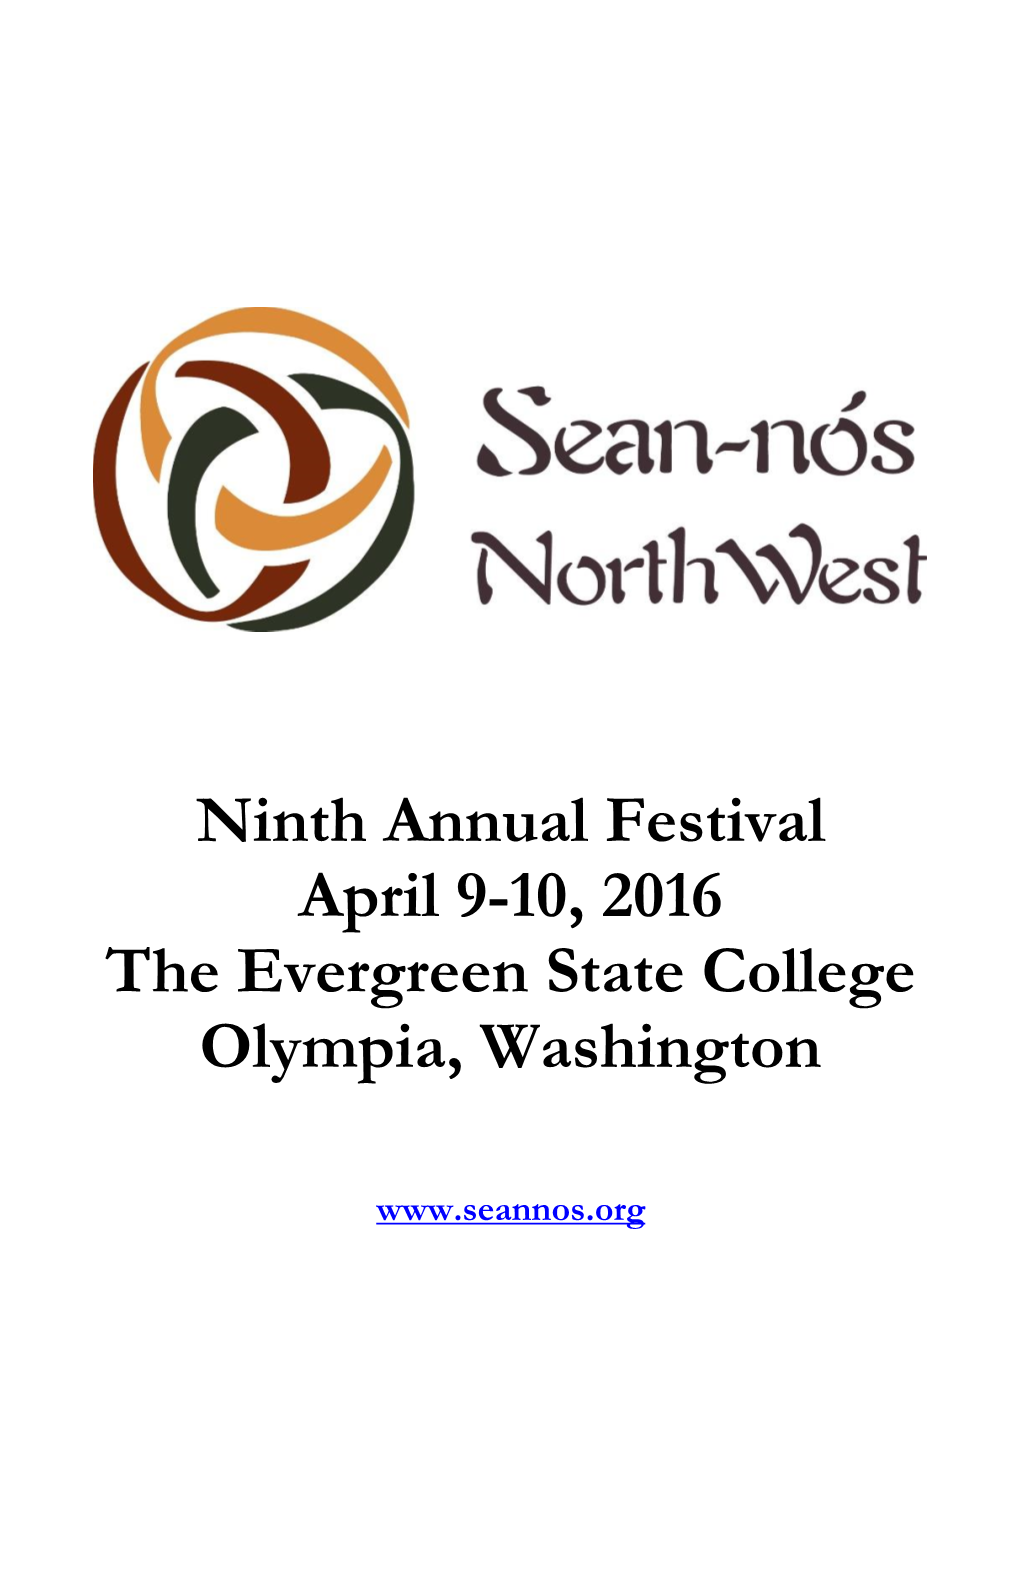 Ninth Annual Festival April 9-10, 2016 the Evergreen State College Olympia, Washington